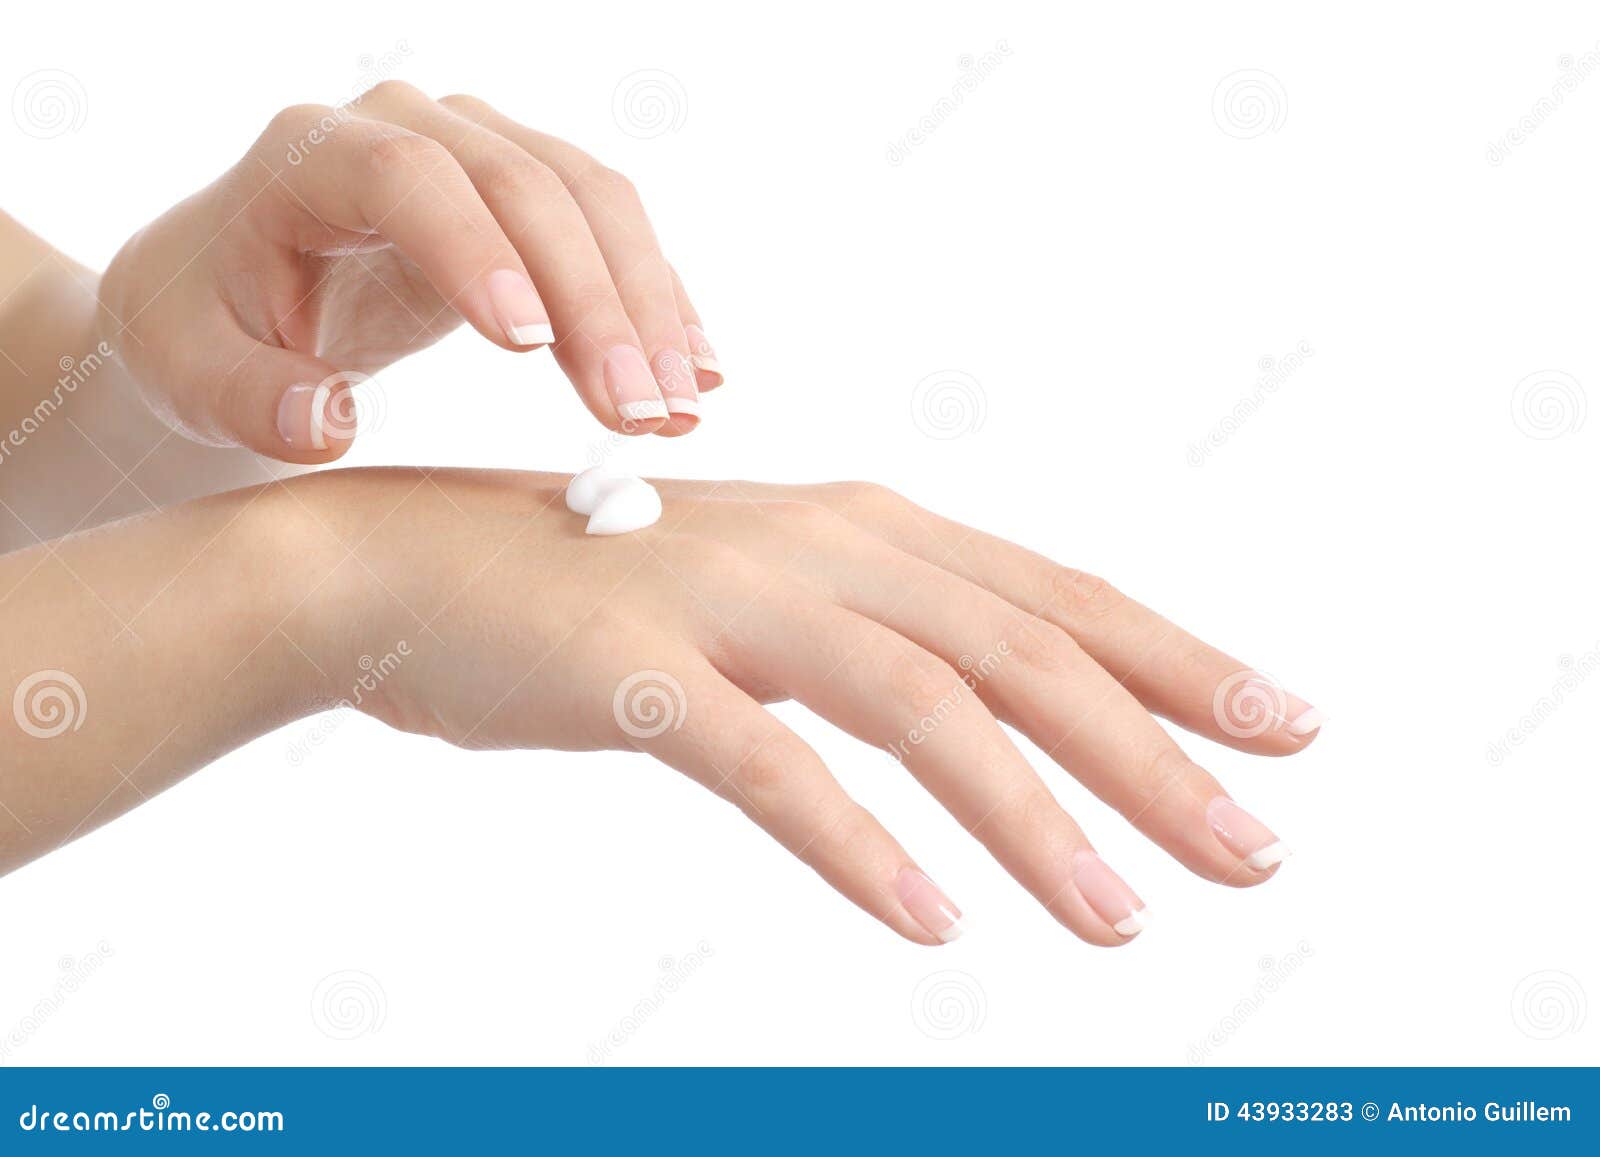 woman hands with perfect manicure applying moisturizer cream